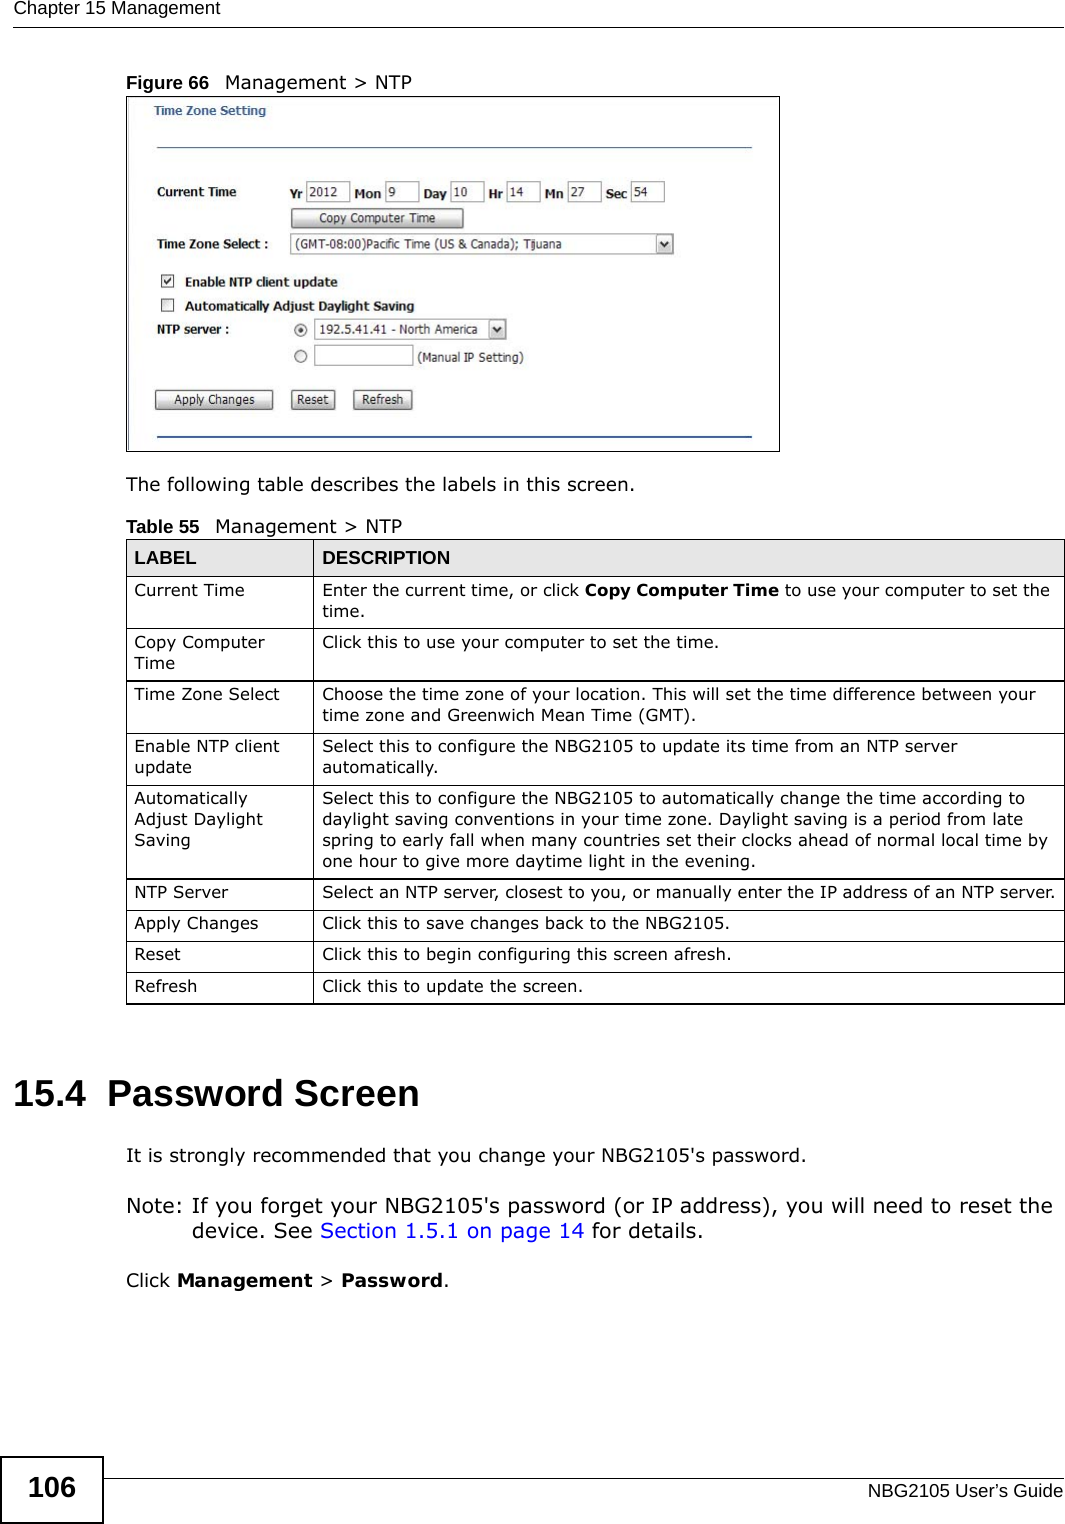 Chapter 15 ManagementNBG2105 User’s Guide106Figure 66   Management &gt; NTP The following table describes the labels in this screen.15.4  Password ScreenIt is strongly recommended that you change your NBG2105&apos;s password. Note: If you forget your NBG2105&apos;s password (or IP address), you will need to reset the device. See Section 1.5.1 on page 14 for details.Click Management &gt; Password.Table 55   Management &gt; NTPLABEL DESCRIPTIONCurrent Time Enter the current time, or click Copy Computer Time to use your computer to set the time.Copy Computer TimeClick this to use your computer to set the time.Time Zone Select Choose the time zone of your location. This will set the time difference between your time zone and Greenwich Mean Time (GMT). Enable NTP client updateSelect this to configure the NBG2105 to update its time from an NTP server automatically.Automatically Adjust Daylight SavingSelect this to configure the NBG2105 to automatically change the time according to daylight saving conventions in your time zone. Daylight saving is a period from late spring to early fall when many countries set their clocks ahead of normal local time by one hour to give more daytime light in the evening.NTP Server Select an NTP server, closest to you, or manually enter the IP address of an NTP server.Apply Changes Click this to save changes back to the NBG2105.Reset Click this to begin configuring this screen afresh.Refresh Click this to update the screen.